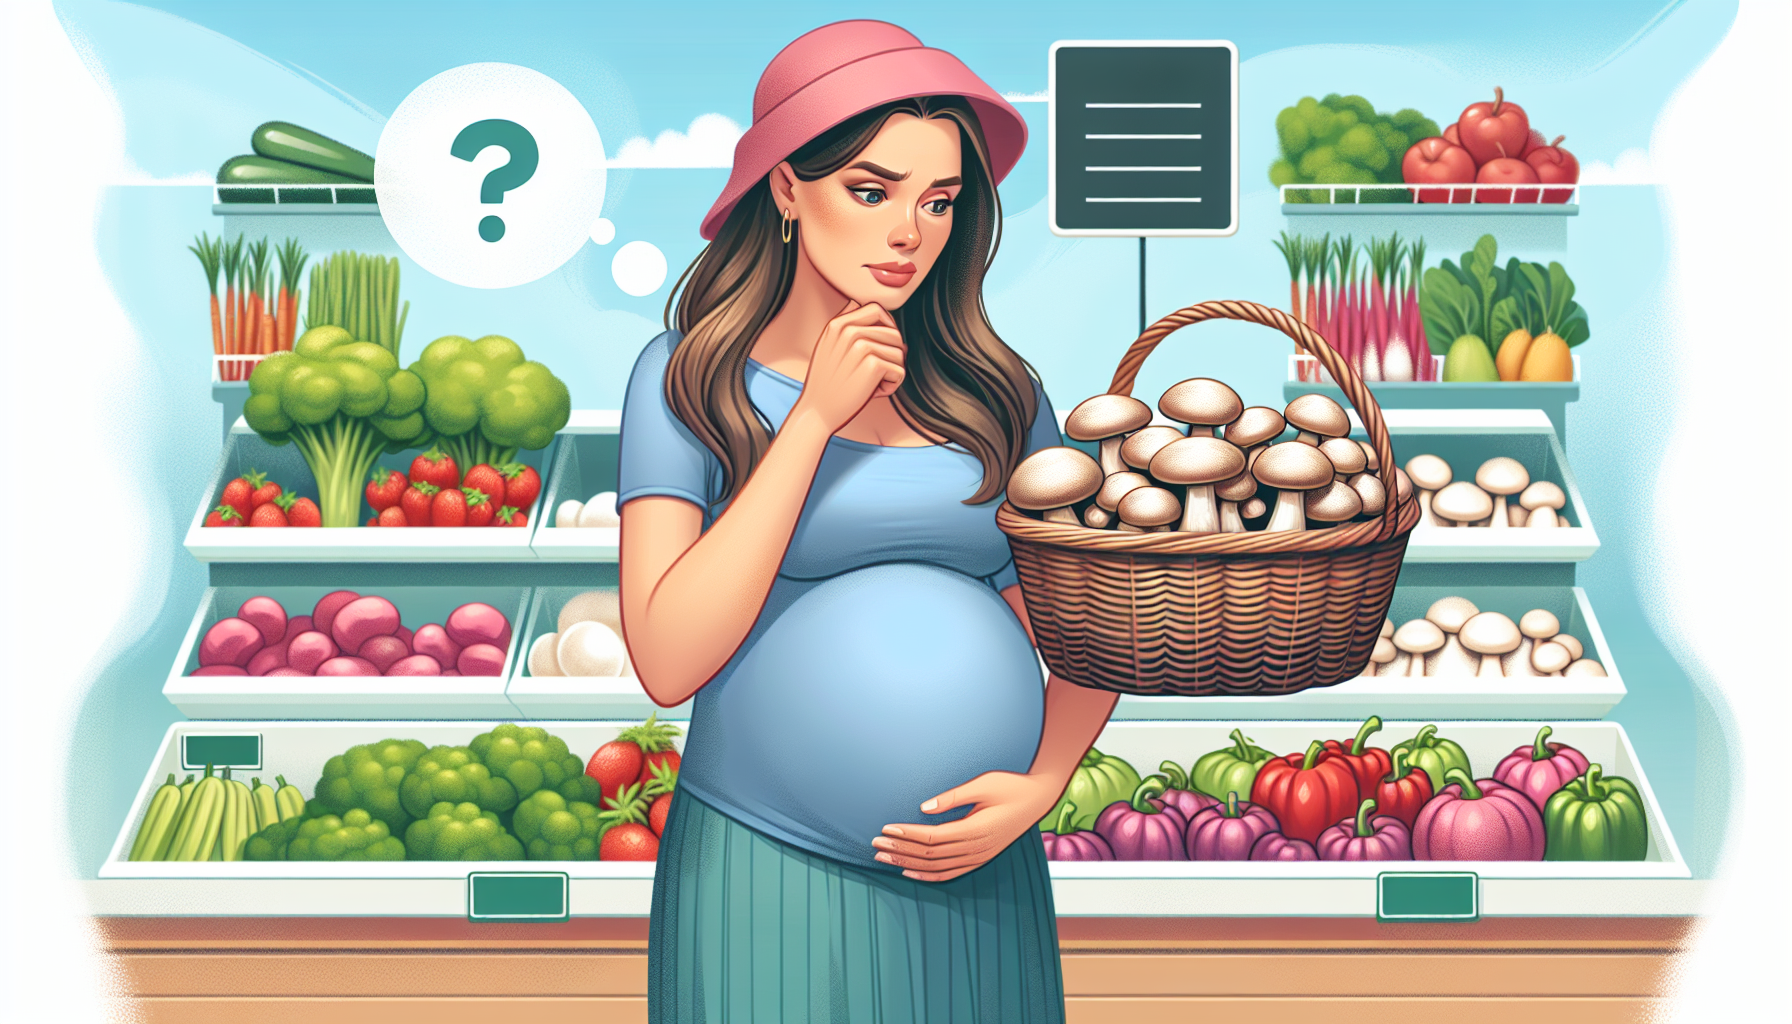 Can You Eat Mushrooms While Pregnant?